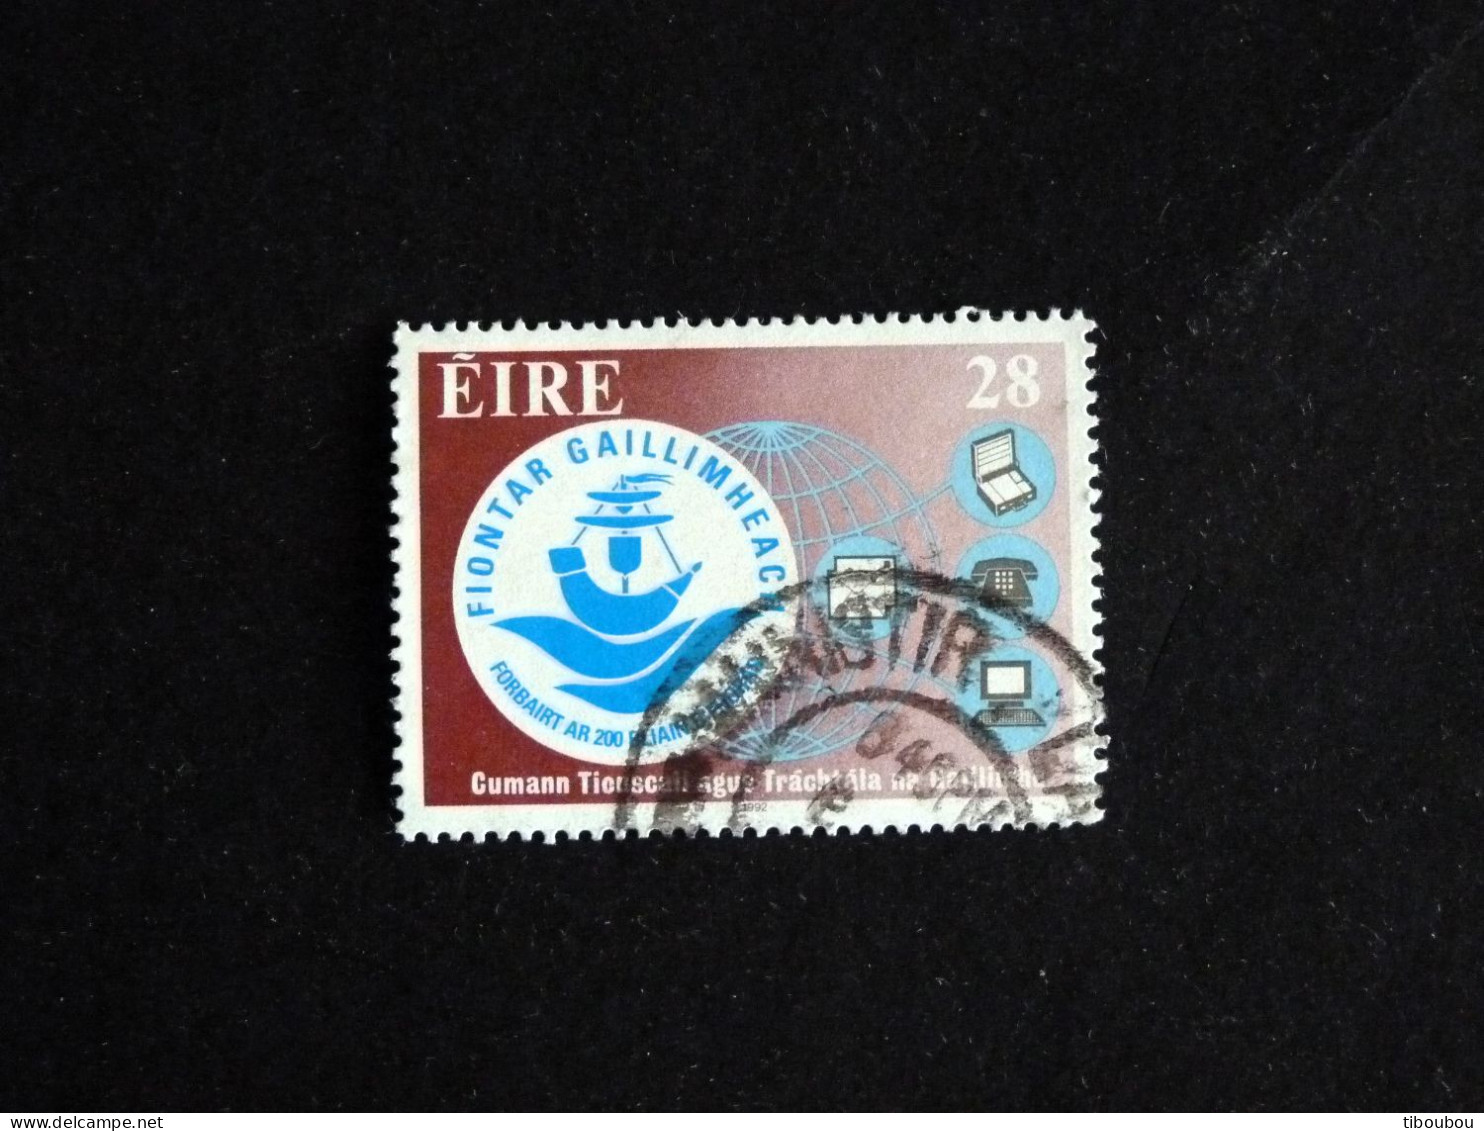 IRLANDE IRELAND EIRE YT 790 OBLITERE - CHAMBRE COMMERCE INDUSTRIE GALWAY - Usados